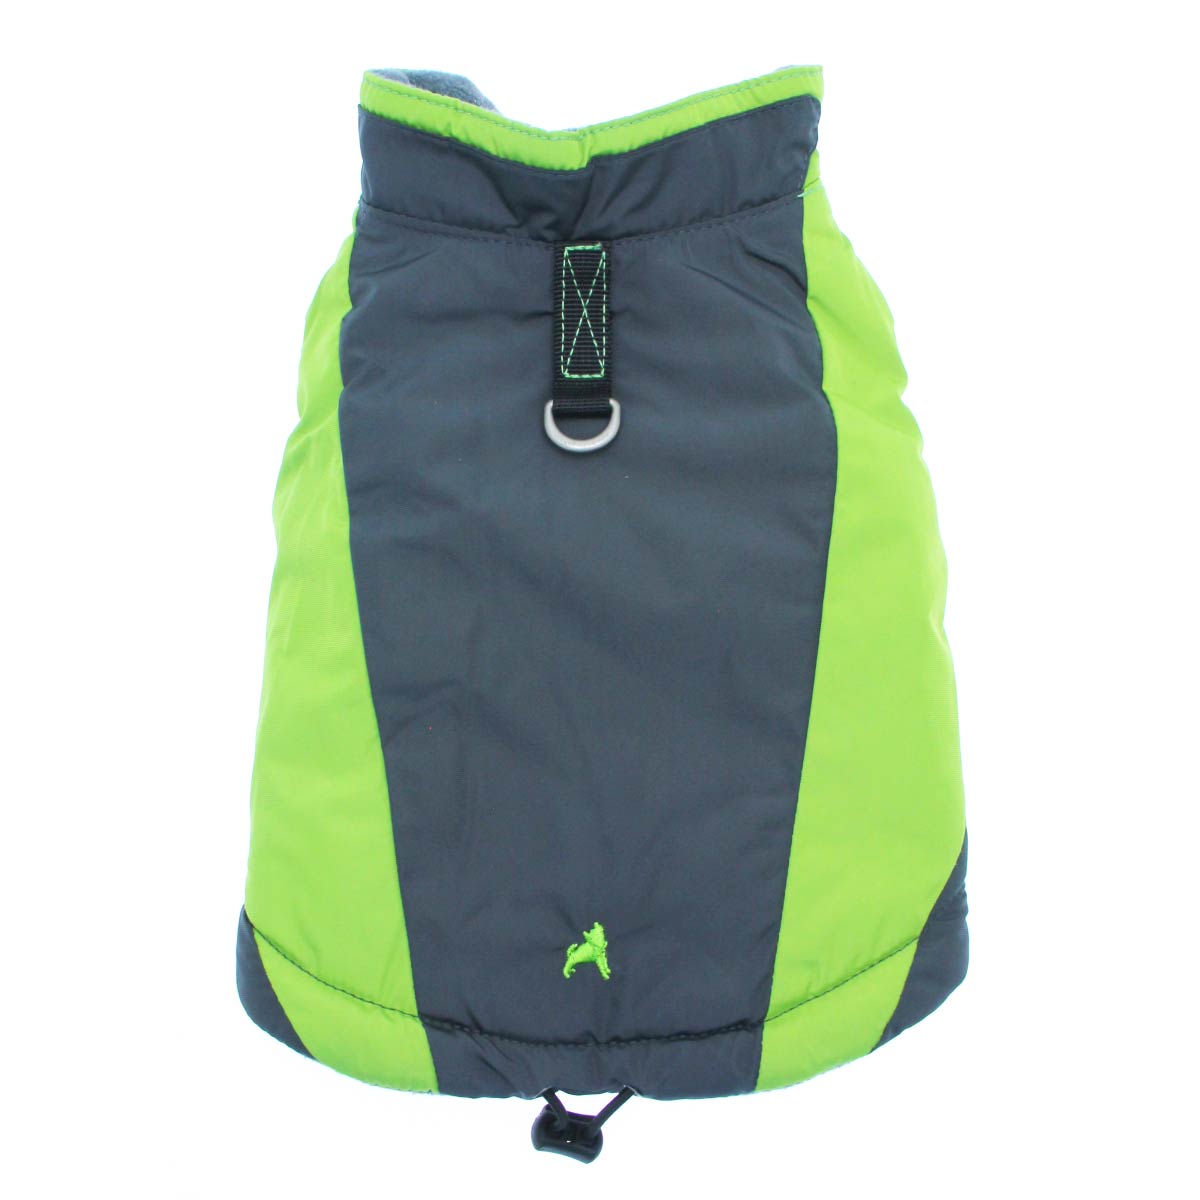 Trekking Dog Jacket by Gooby - Lime Green